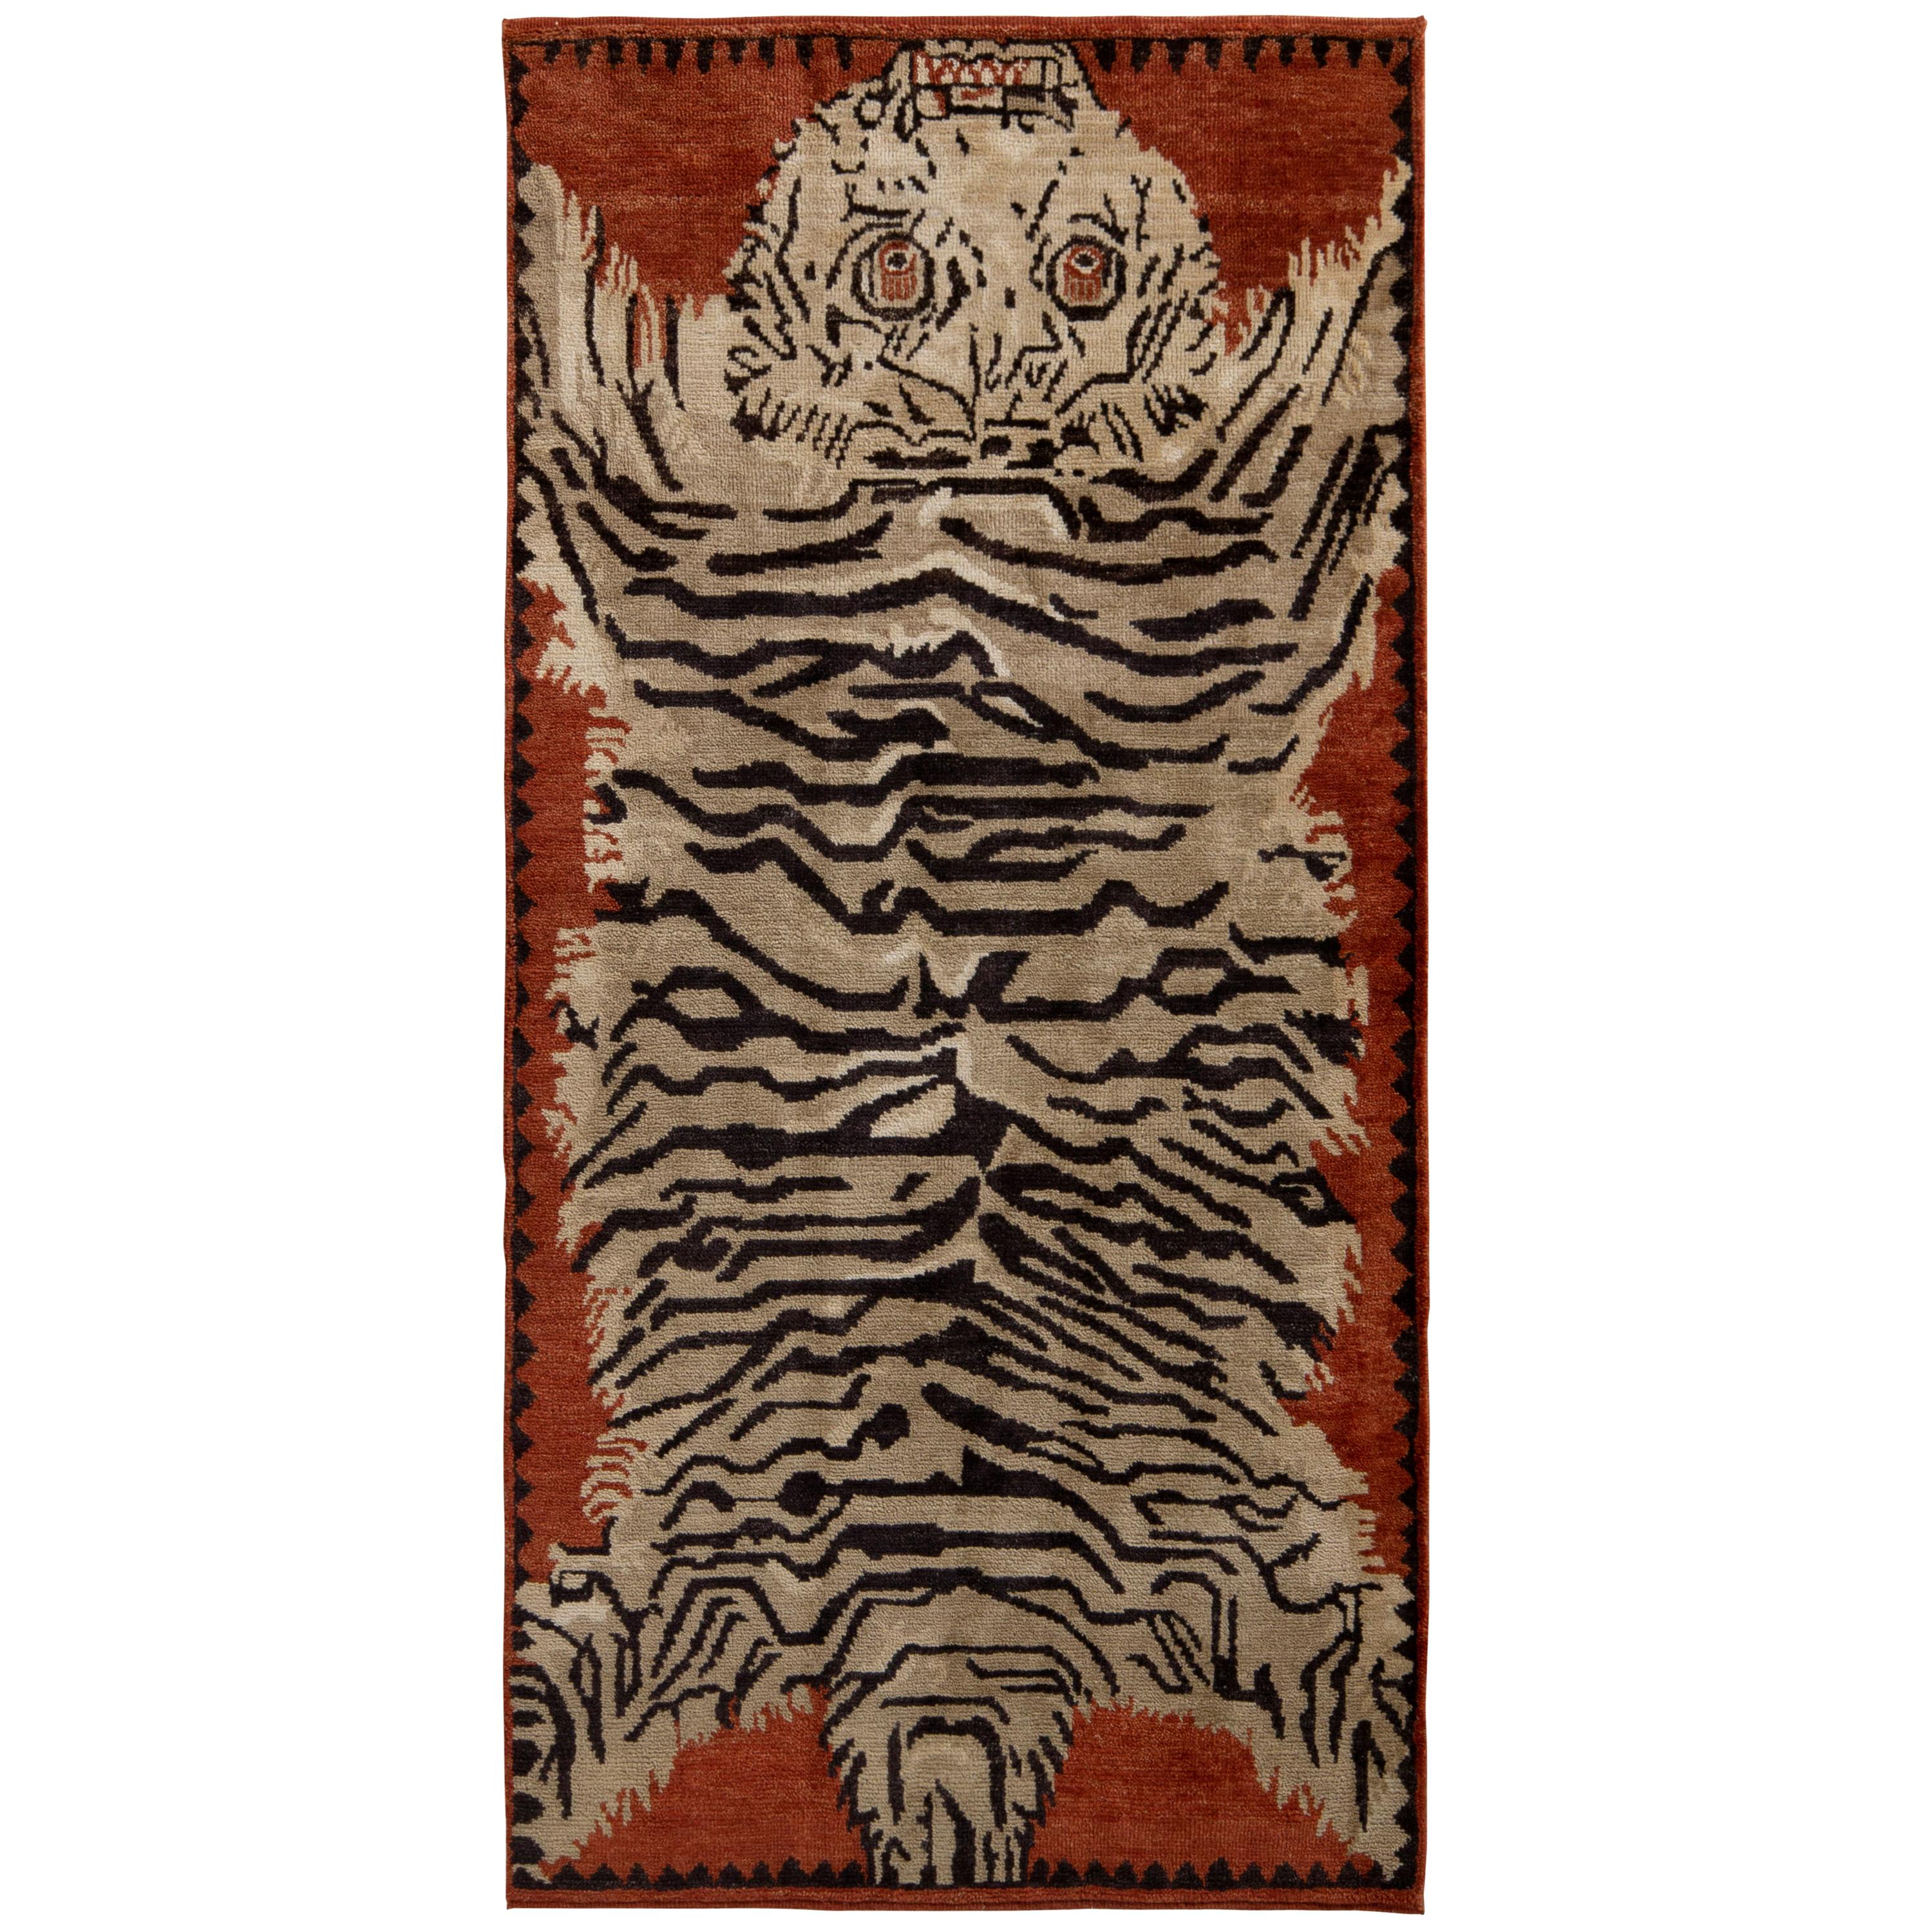 Rug & Kilim's Hand Knotted Tiger Rug in Beige Brown Pictorial Pattern